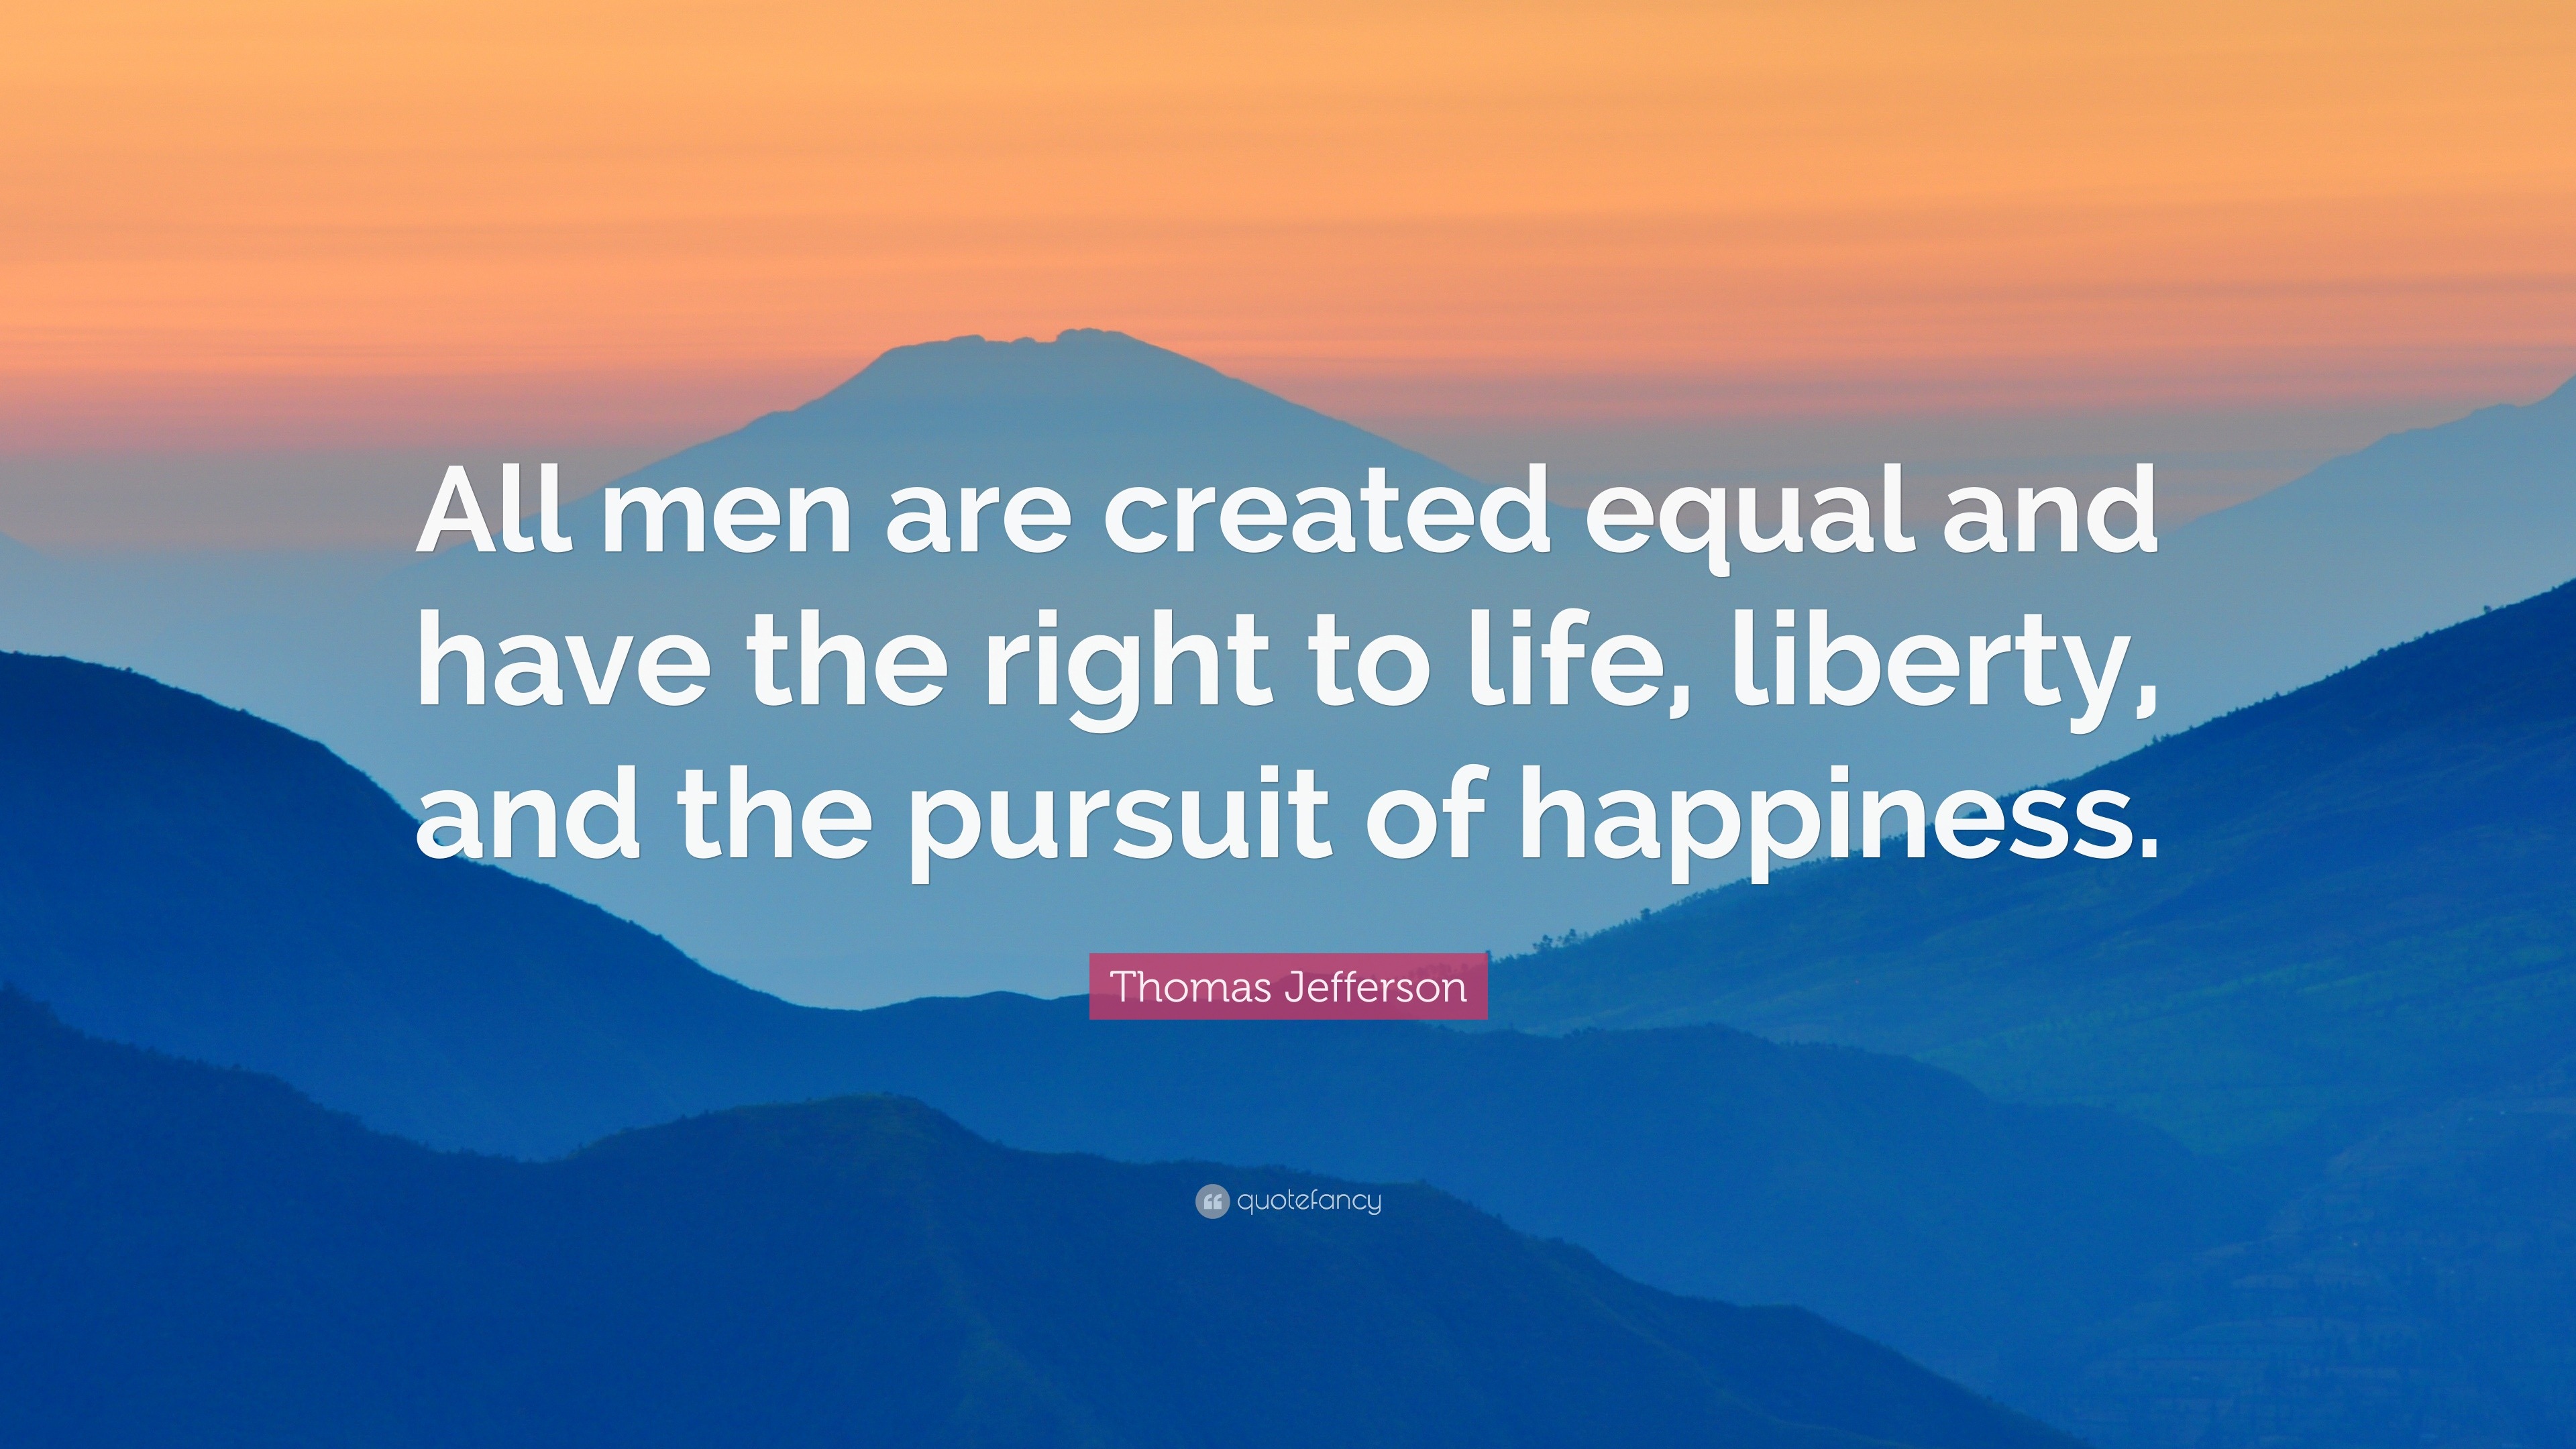 life liberty and the pursuit of happiness quote